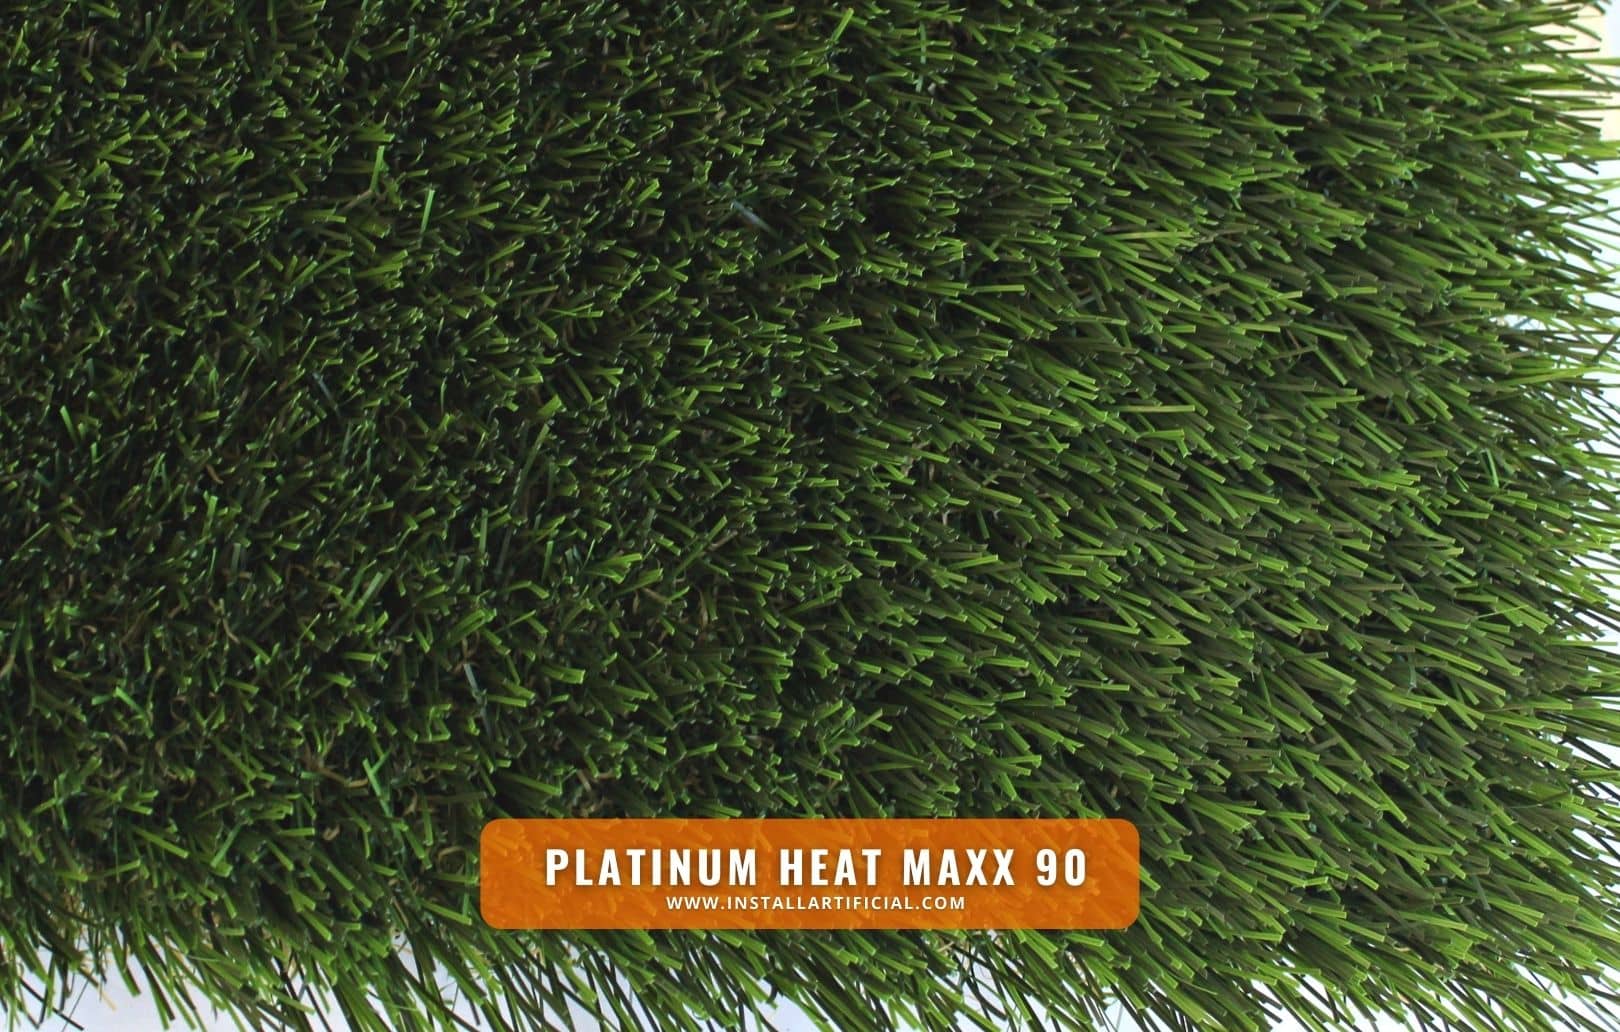 Platinum Heat Maxx 90, Imperial Synthetic Turf, top